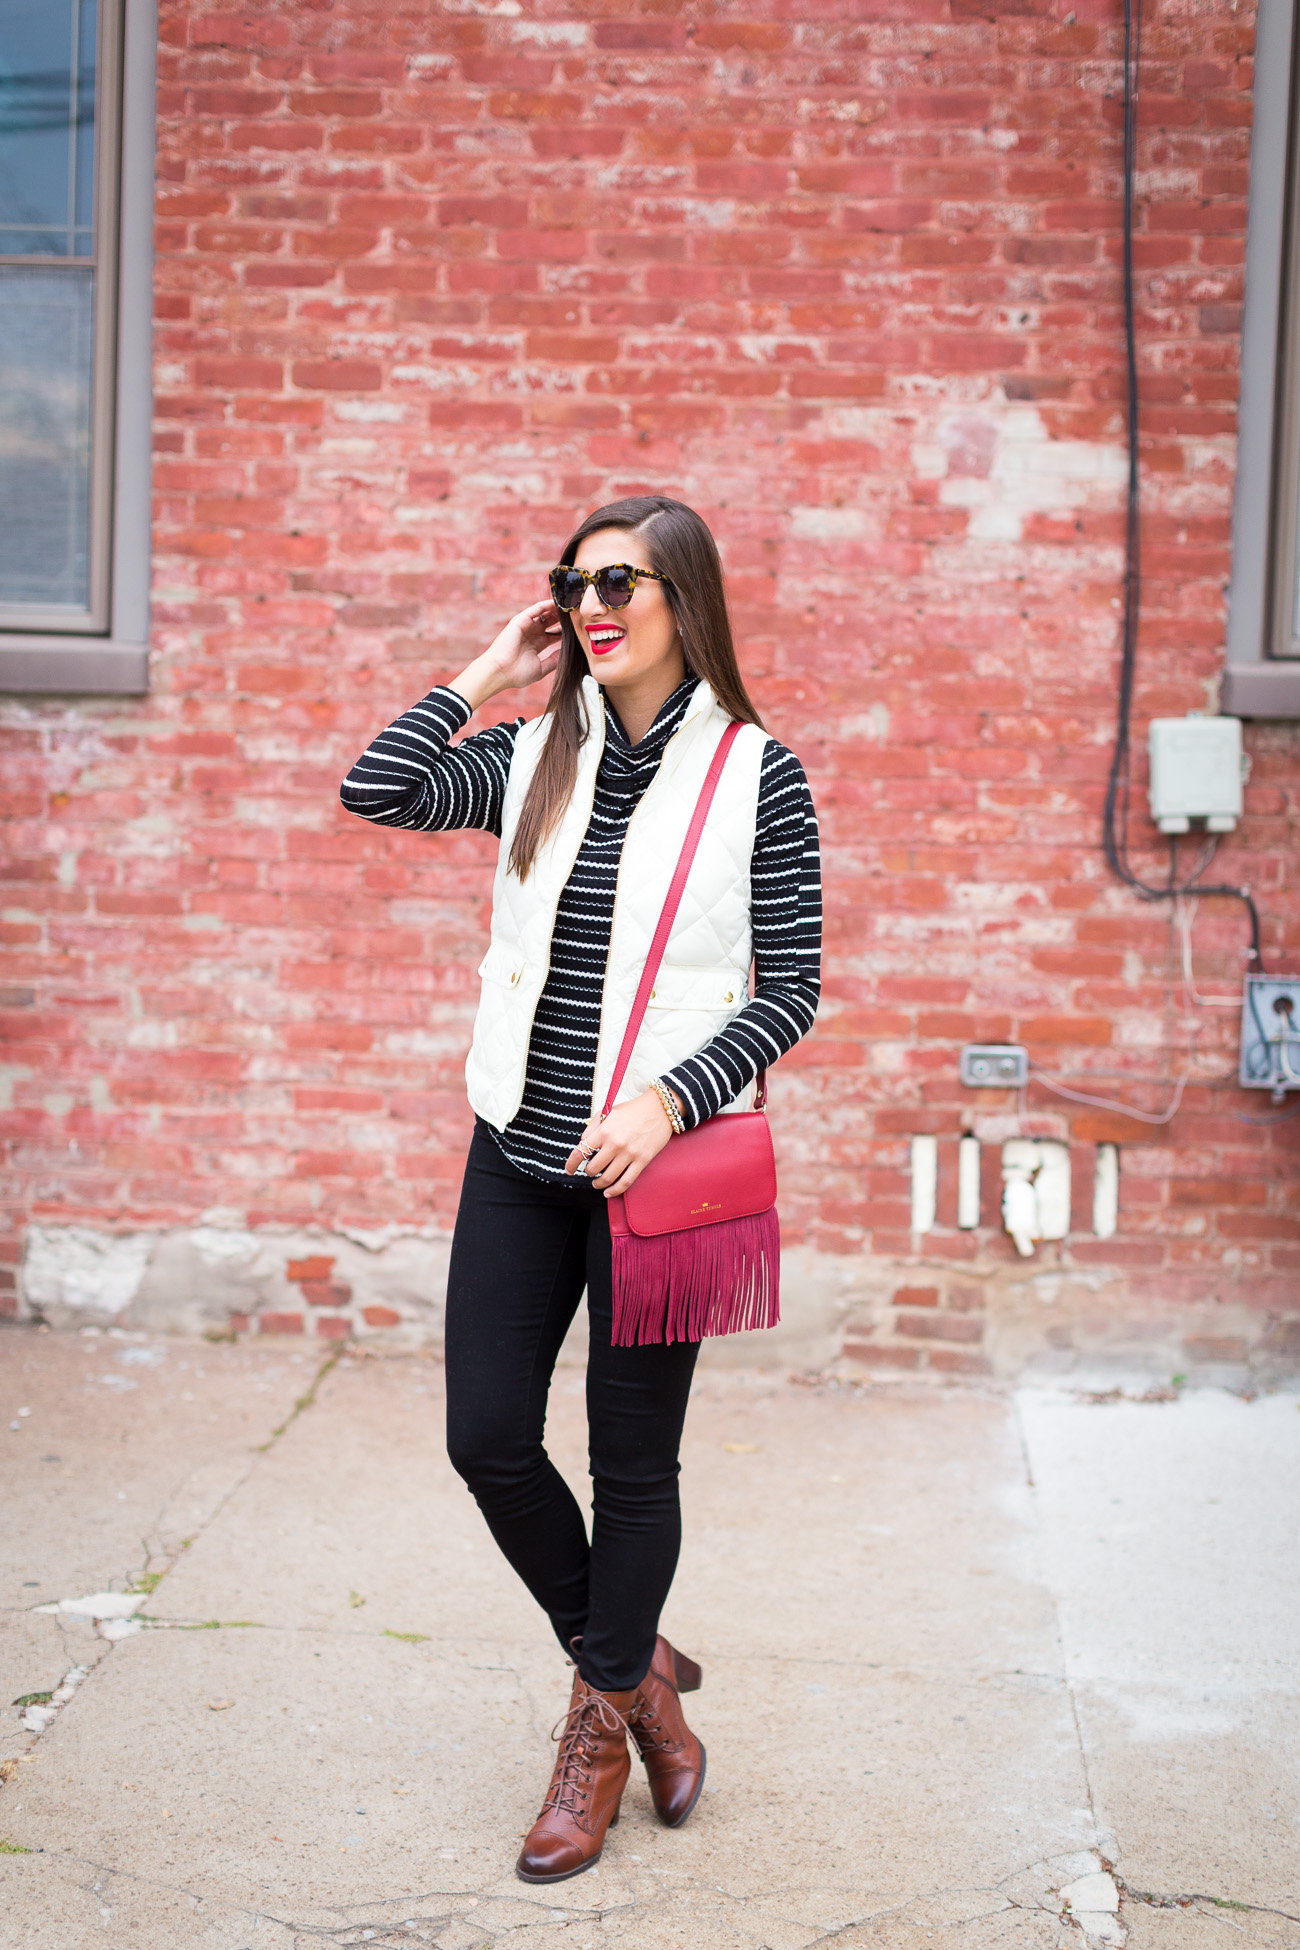 j.crew excursion vest, quilted puffer vest, stripe turtleneck, elaine turner crossbody, lace up booties, fall fashion and style // grace wainwright from a southern drawl